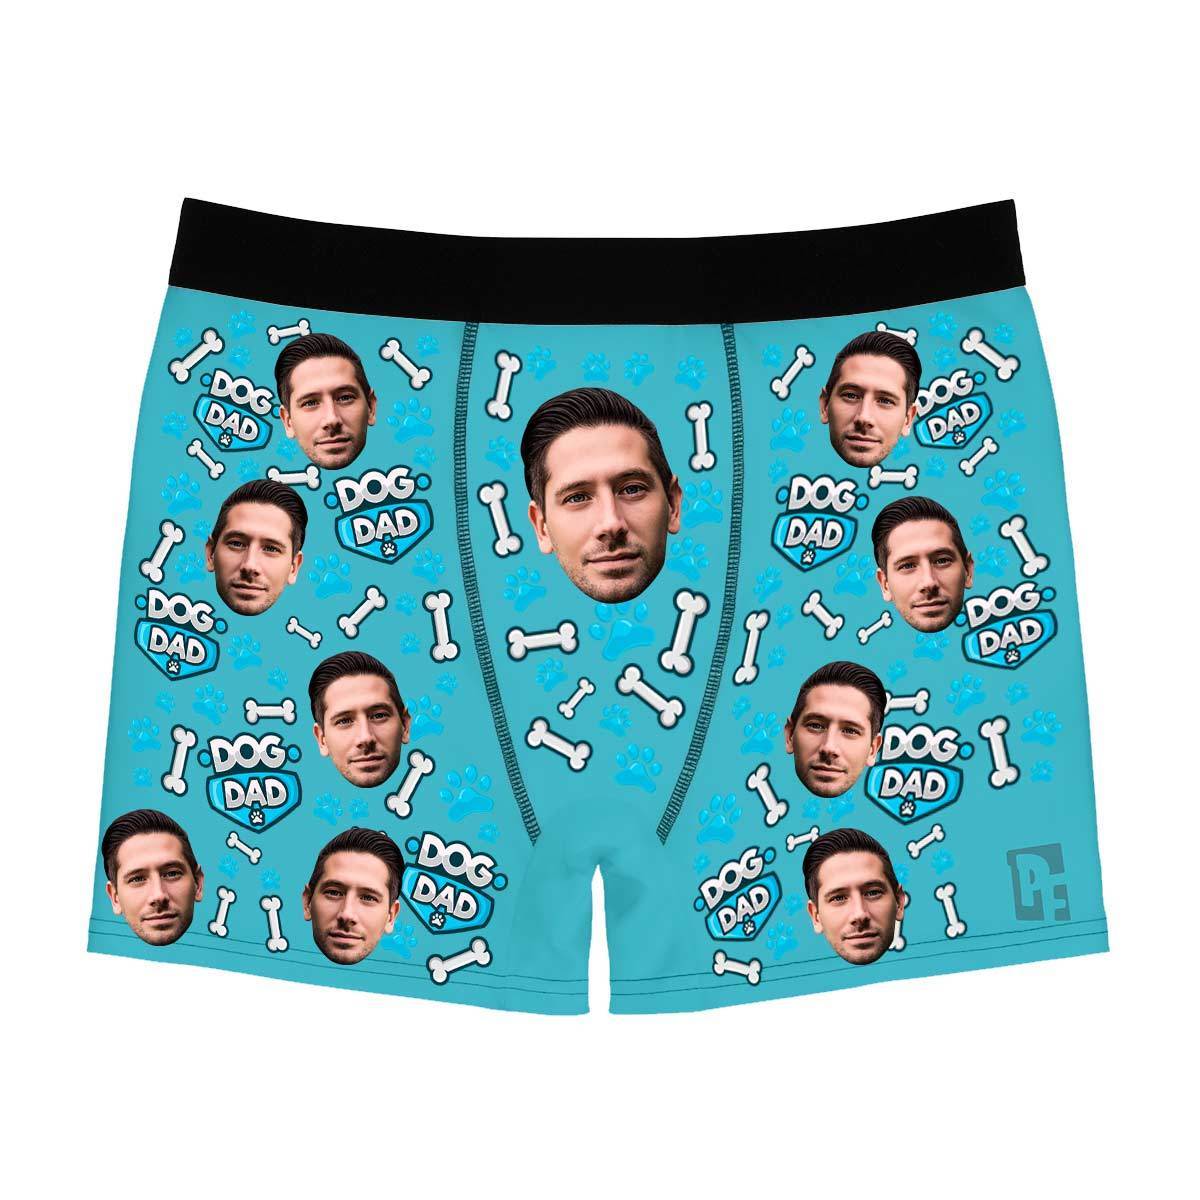 Blue Dog dad men's boxer briefs personalized with photo printed on them